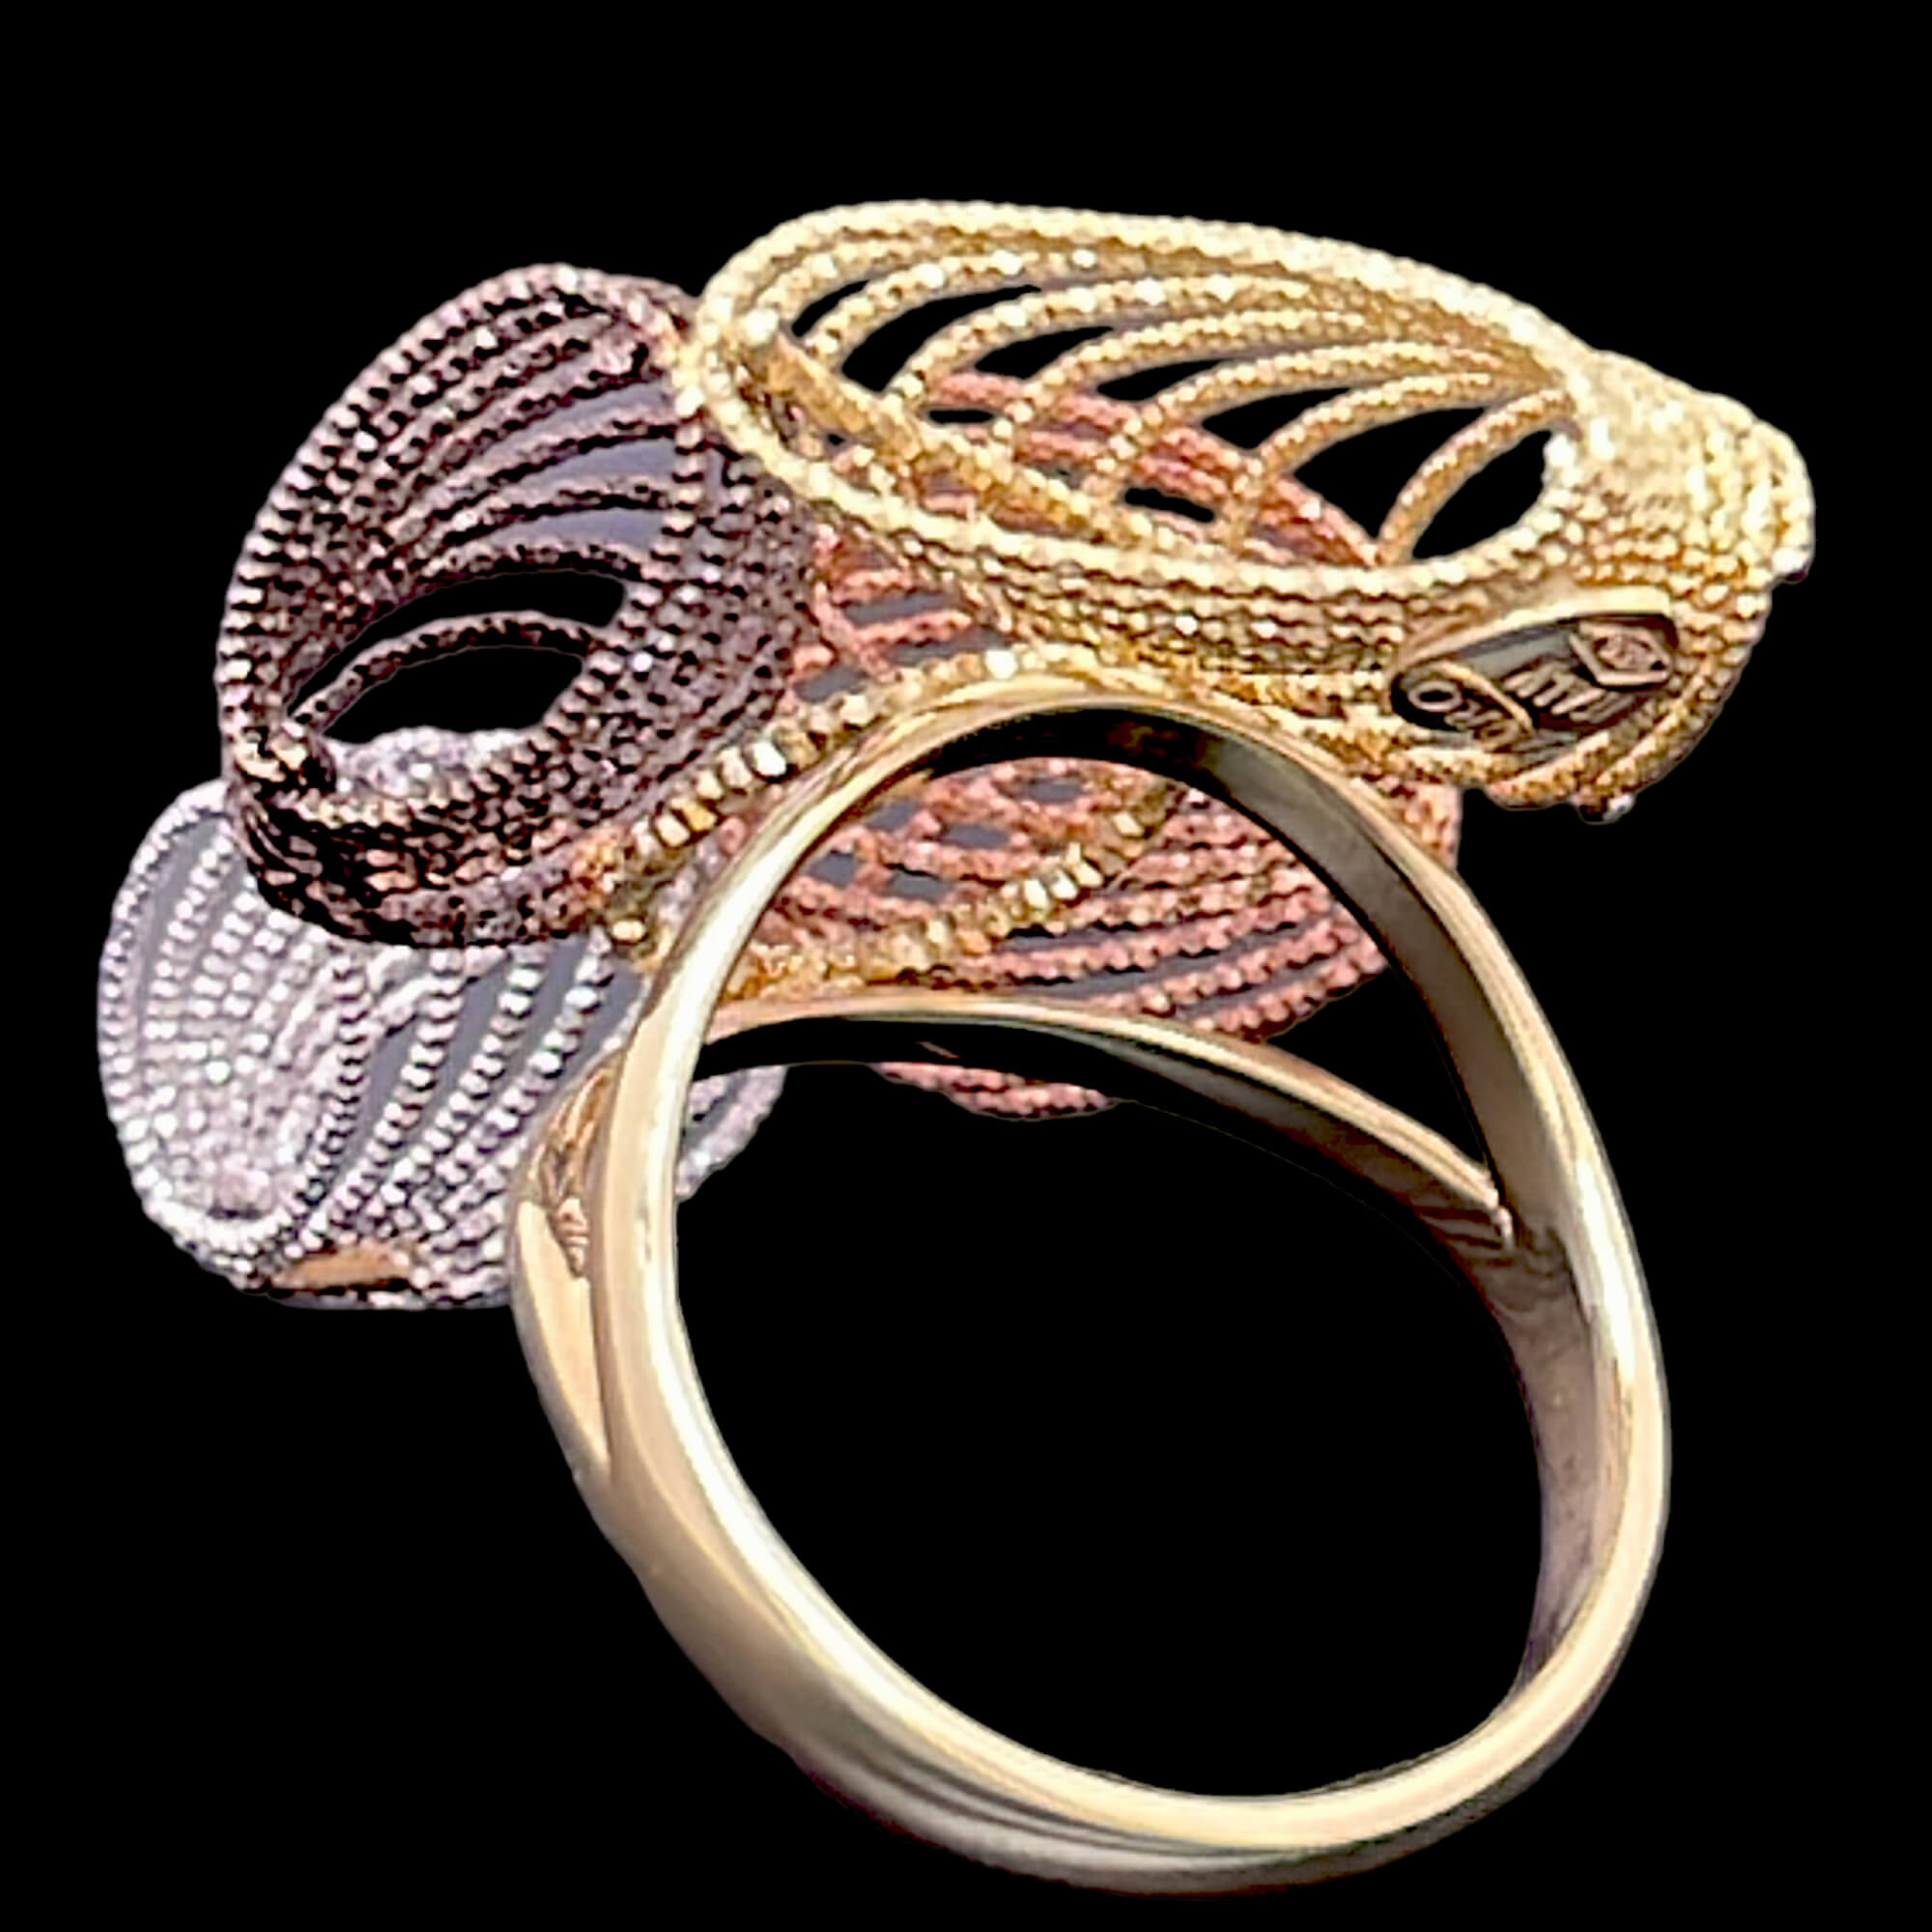 Edited four-colored ring made of 18kt gold